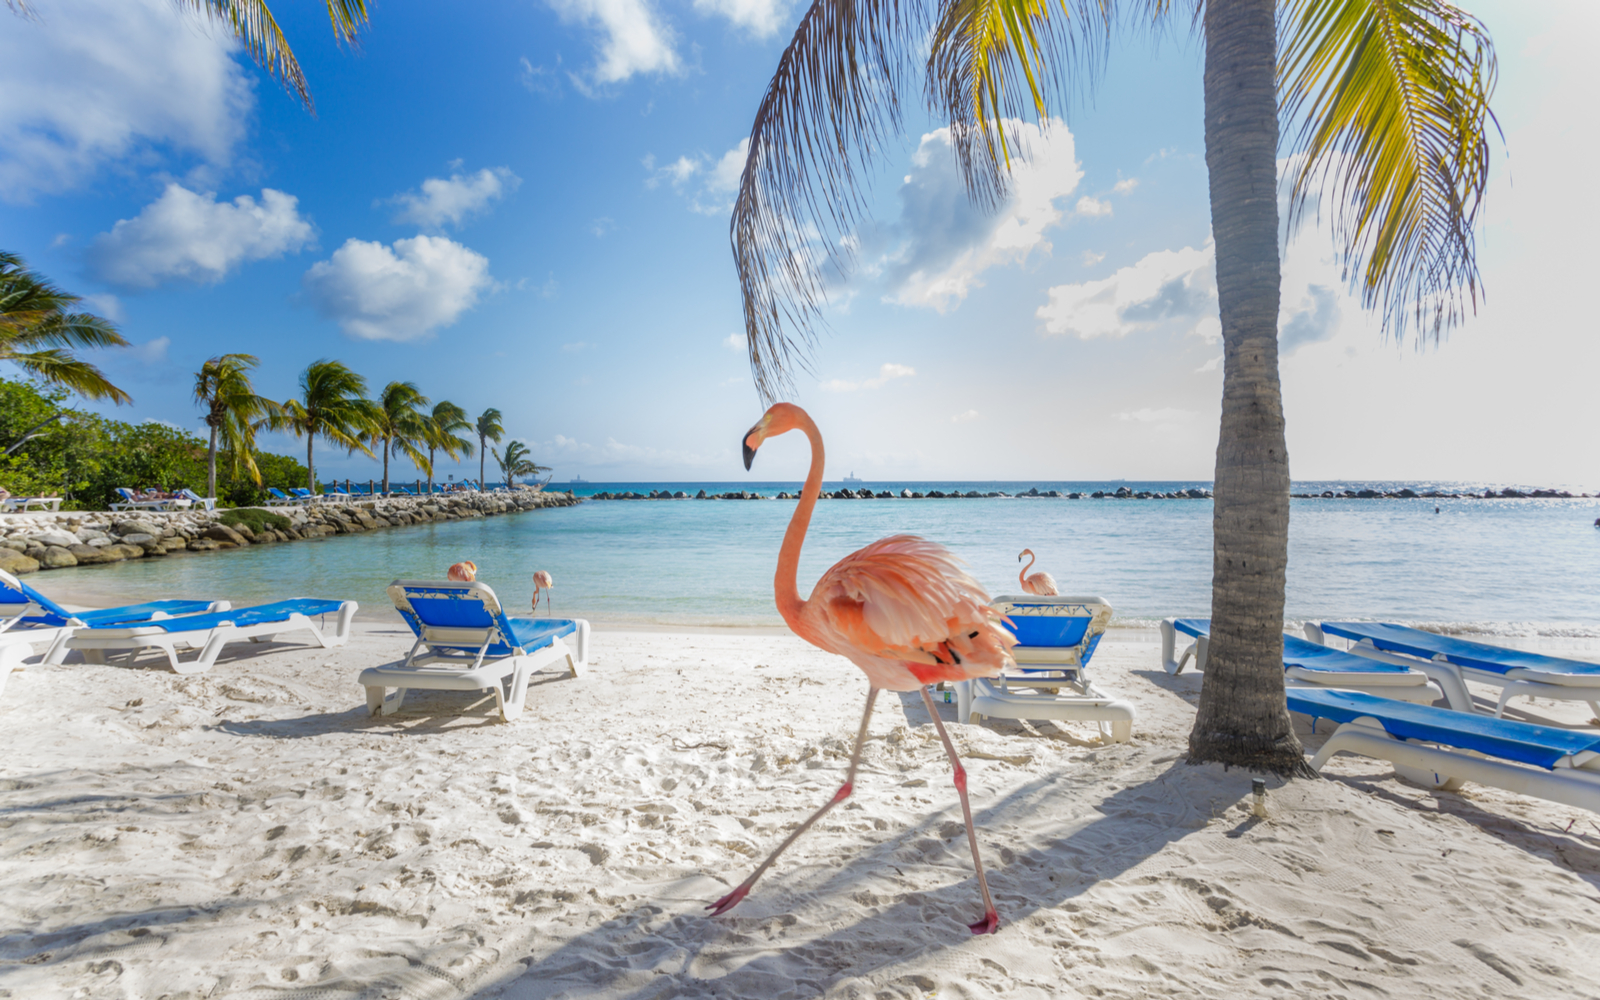 Three flamingos on one of the best beaches in Aruba with blue water and clear sky